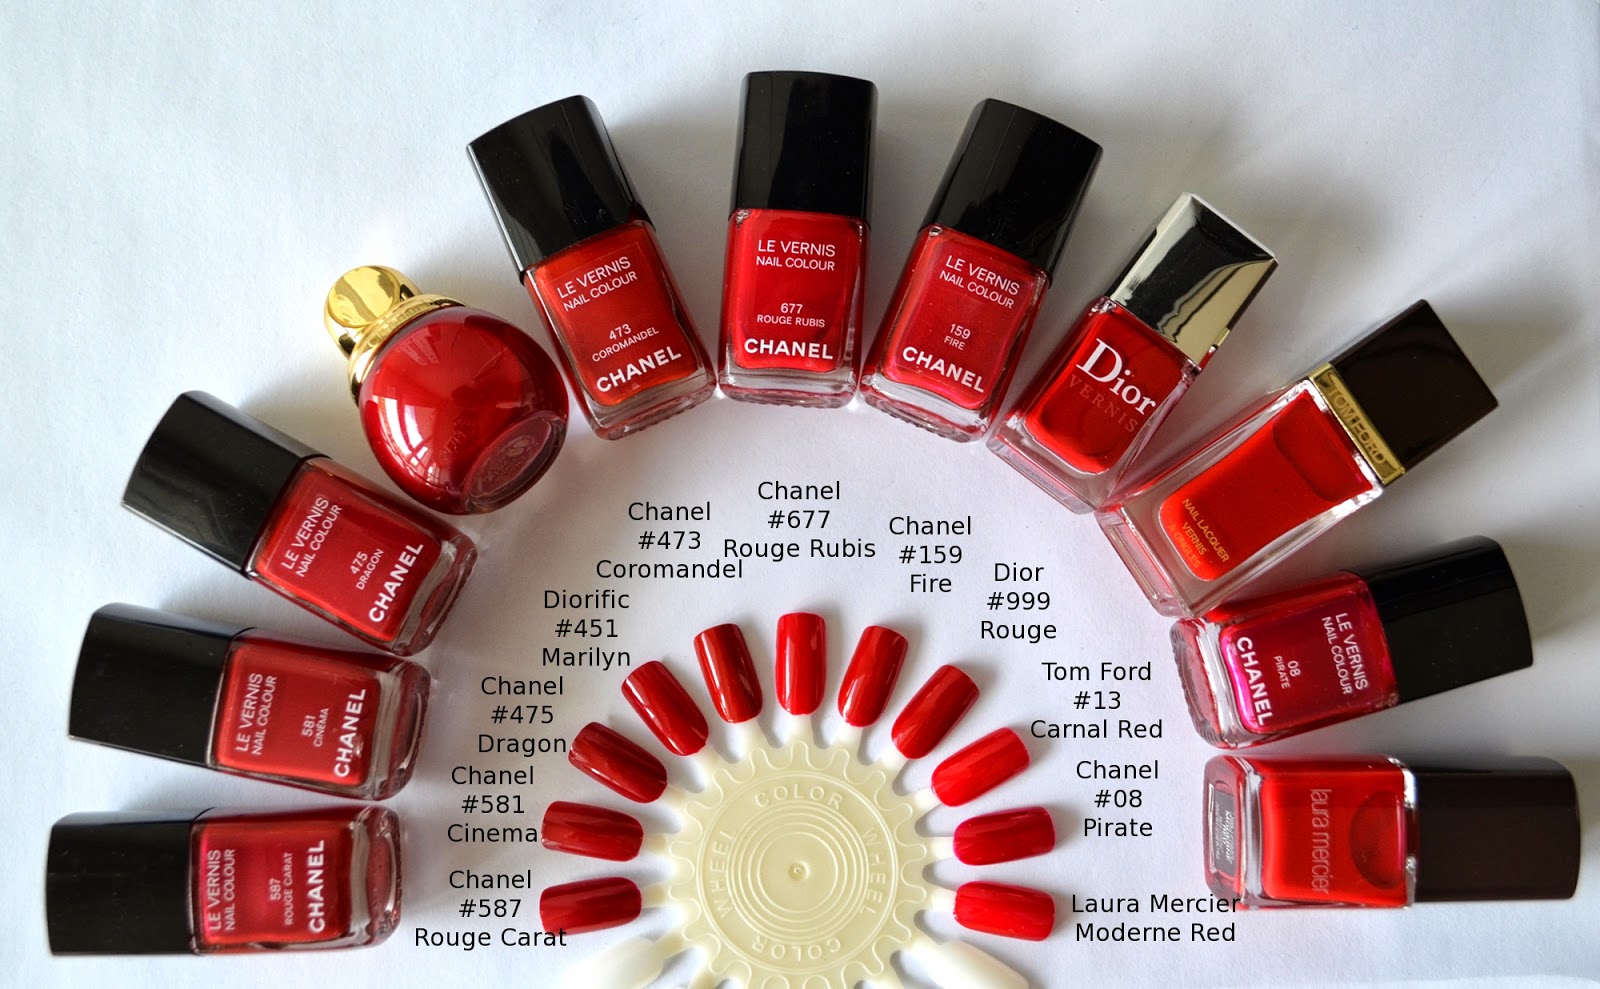 Limited Edition Chanel LE VERNIS LONGWEAR NAIL COLOUR 913 ROUGE INTEMPOREL  RED